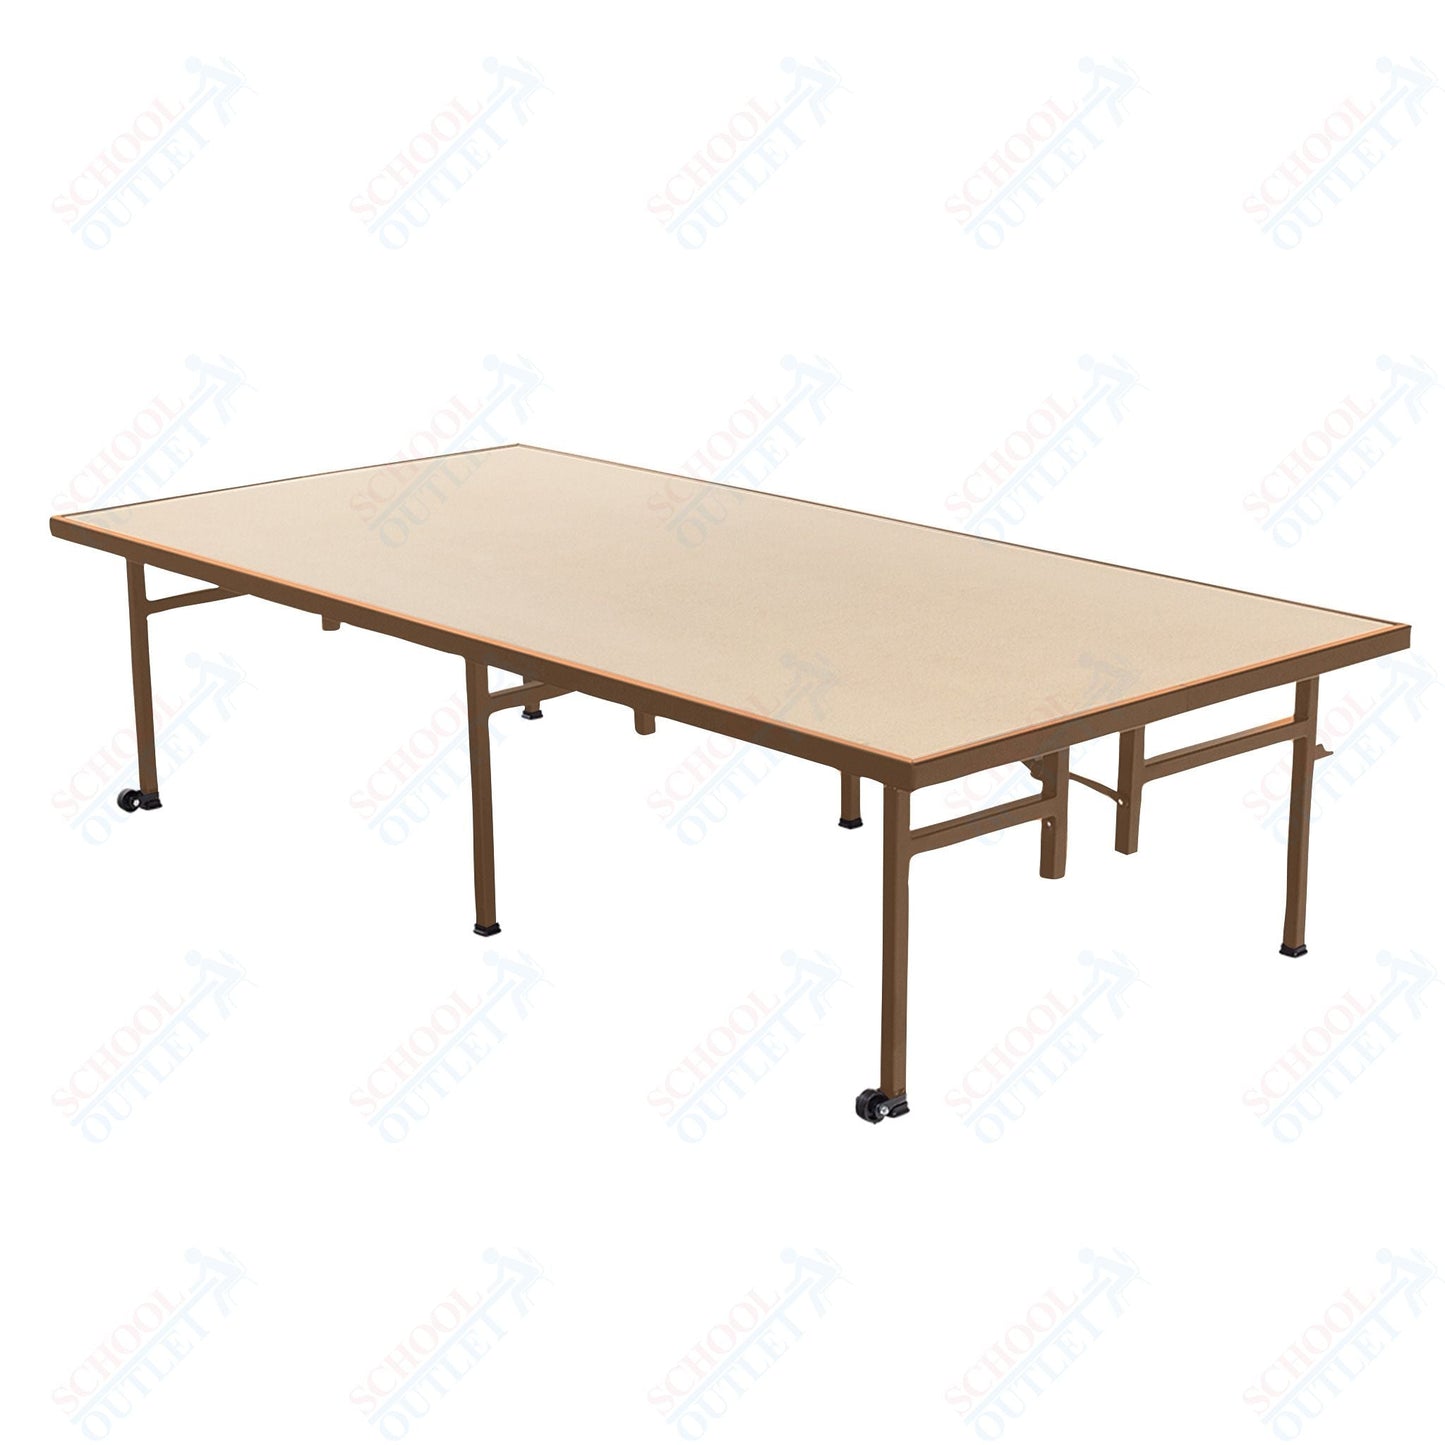 AmTab Fixed Height Stage - Hardboard Top - 48"W x 72"L x 8"H (AmTab AMT - ST4608H) - SchoolOutlet